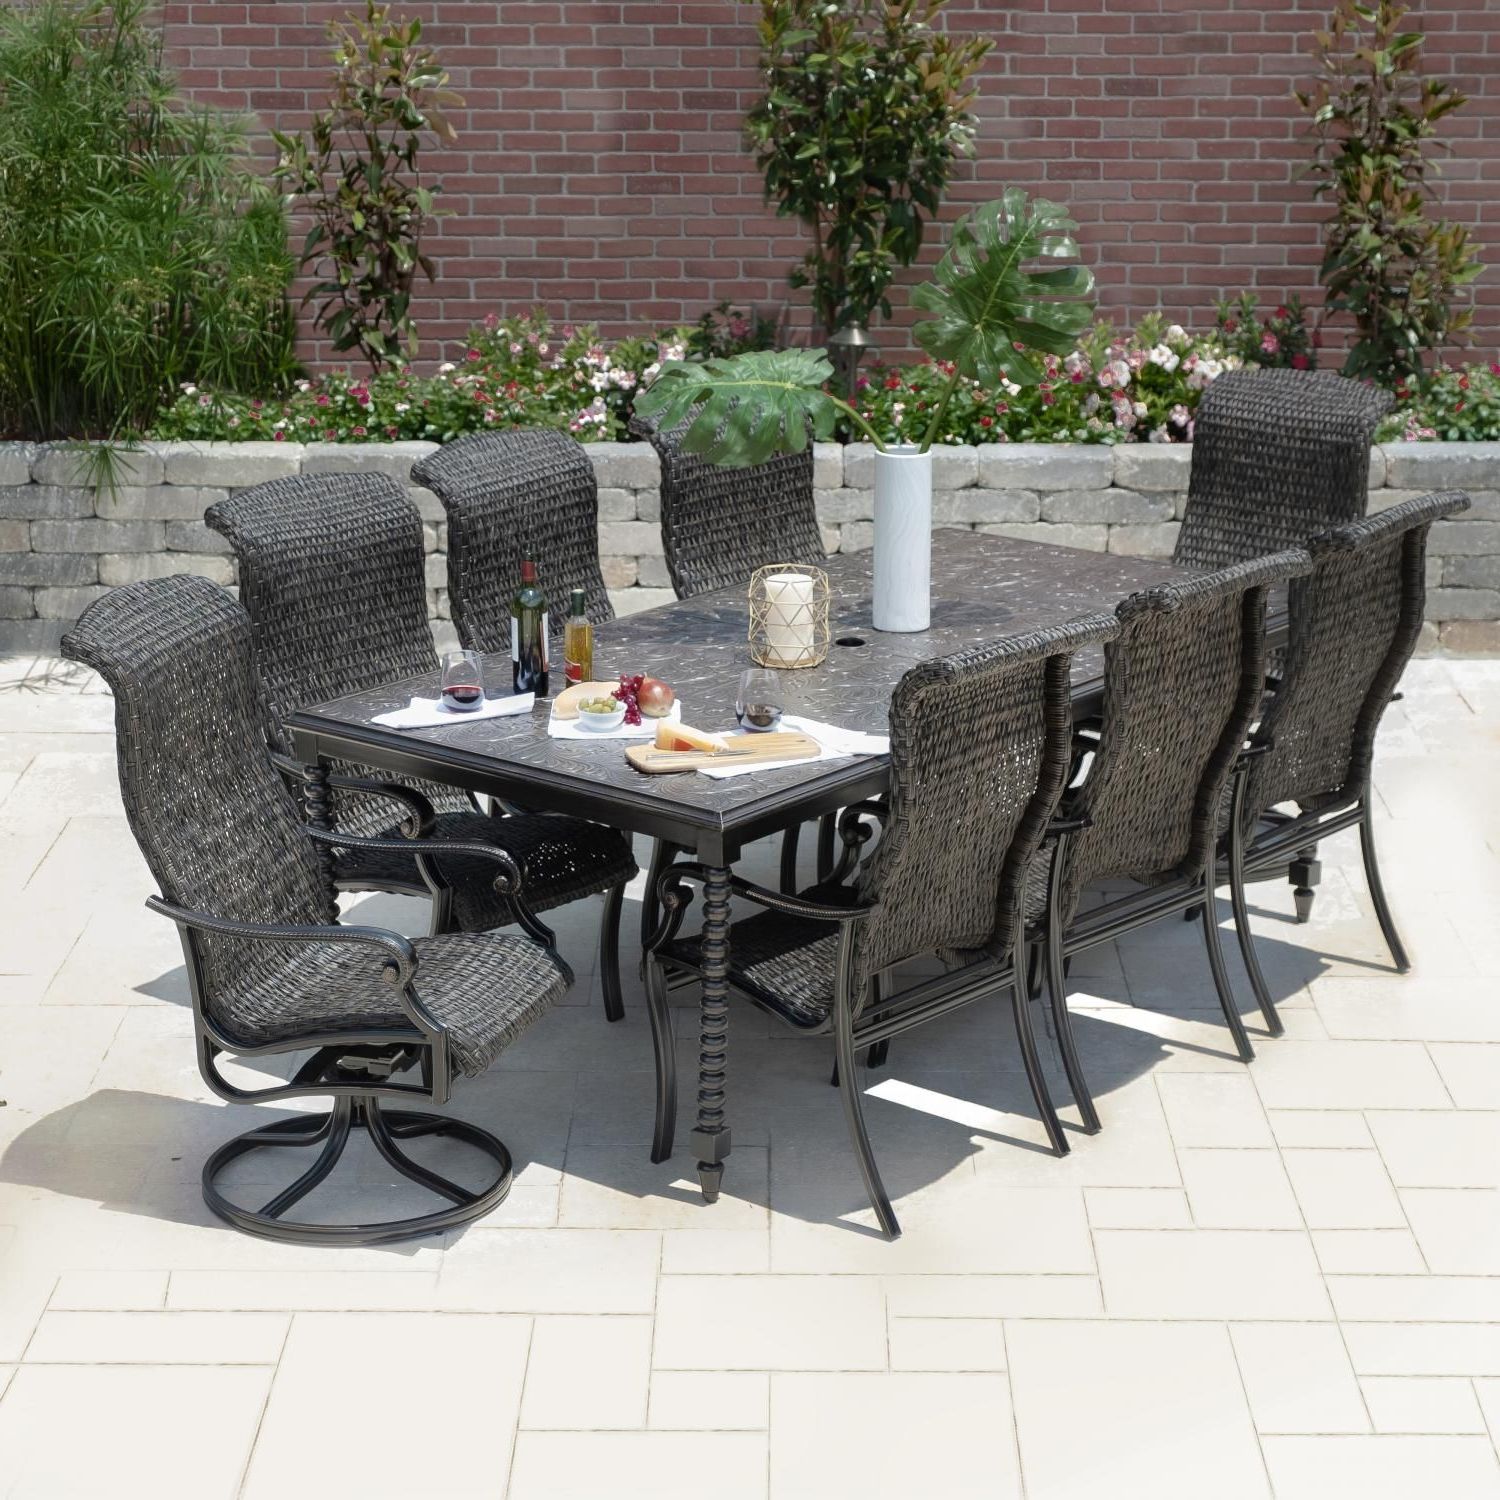 Most Current Du Monde 9 Piece Banana Leaf Wicker Patio Dining Set W/ 90 X 46 Inch Throughout Wicker Rectangular Patio Dining Sets (View 9 of 15)